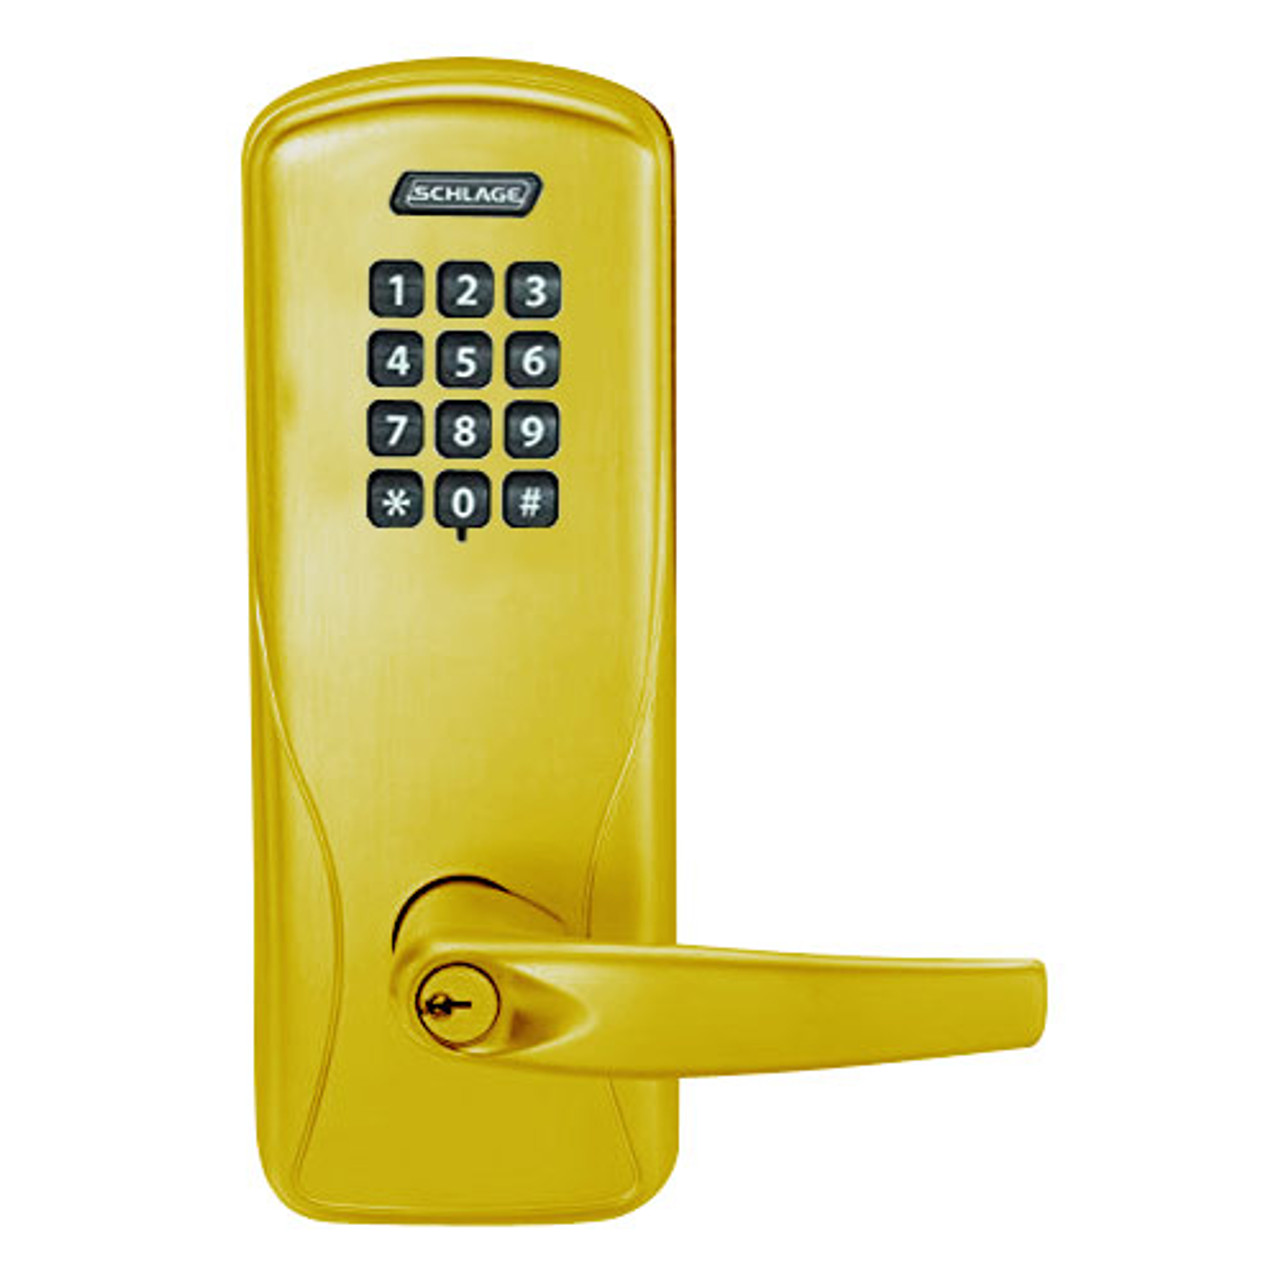 CO100-MS-70-KP-ATH-PD-605 Schlage Standalone Mortise Electronic Keypad locks in Bright Brass